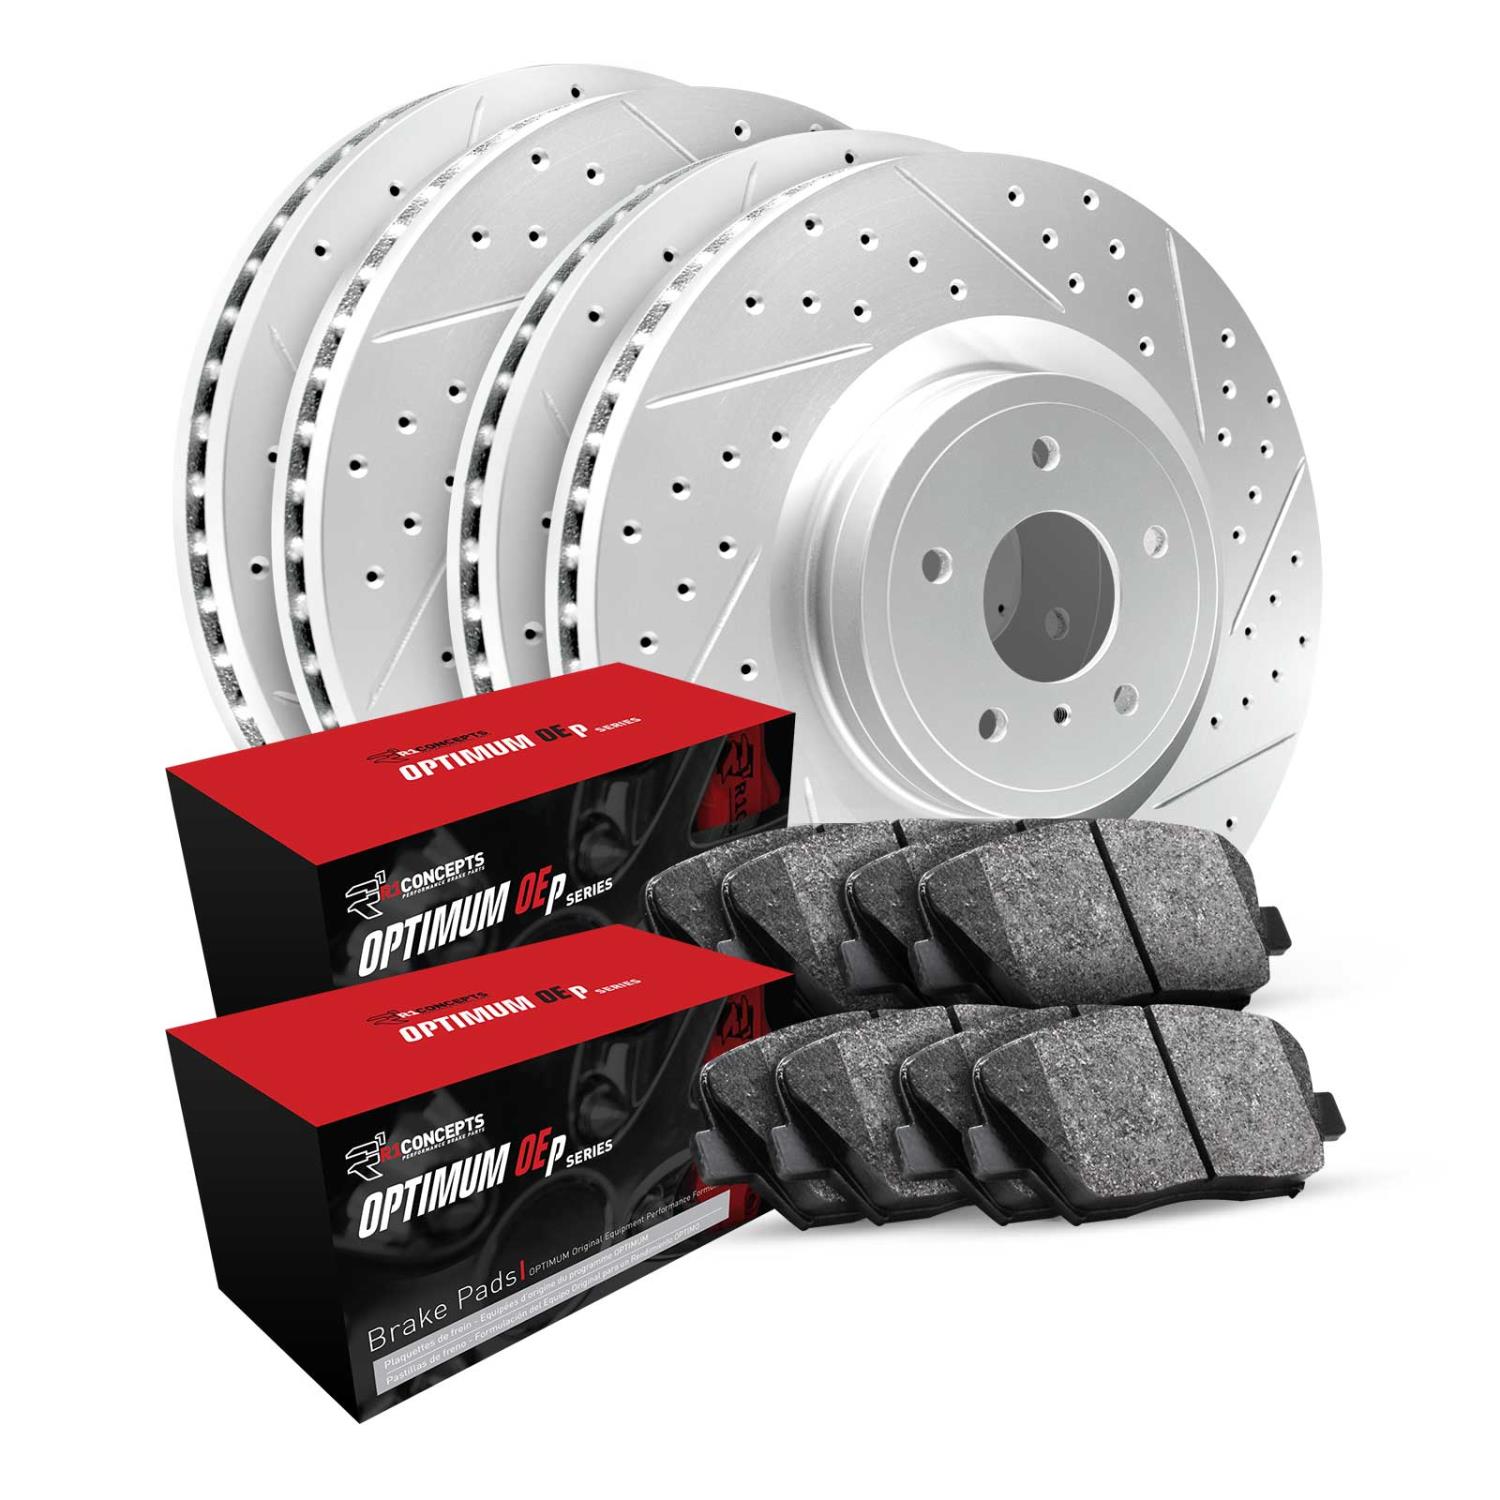 GEO-Carbon Drilled & Slotted Brake Rotor & Drum Set w/Optimum OE Pads & Shoes, 2006-2012 Fits Multiple Makes/Models